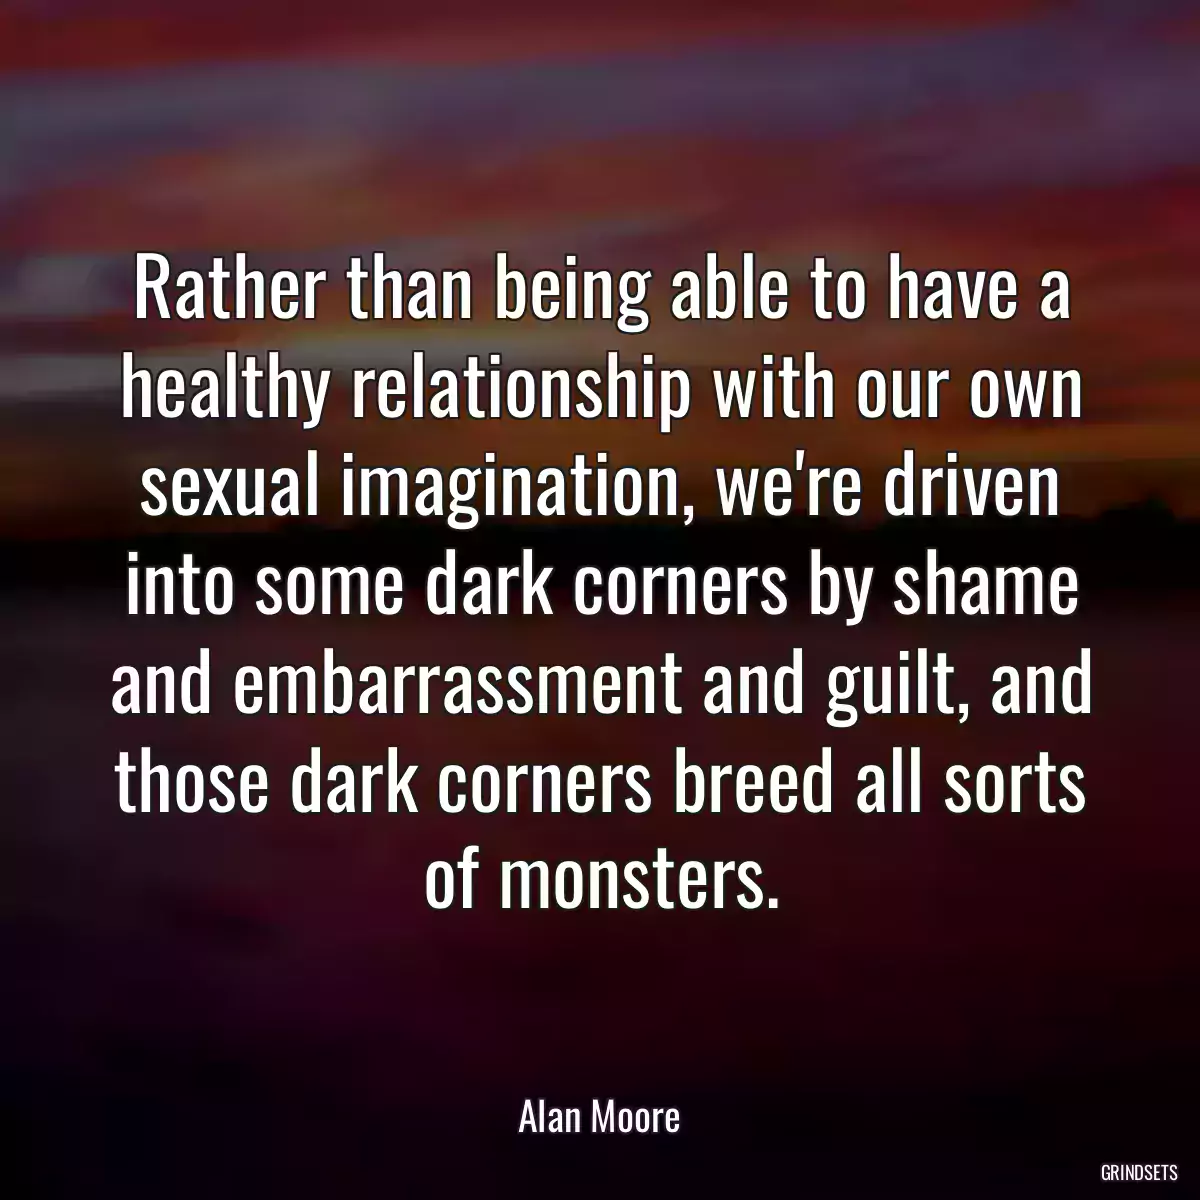 Rather than being able to have a healthy relationship with our own sexual imagination, we\'re driven into some dark corners by shame and embarrassment and guilt, and those dark corners breed all sorts of monsters.